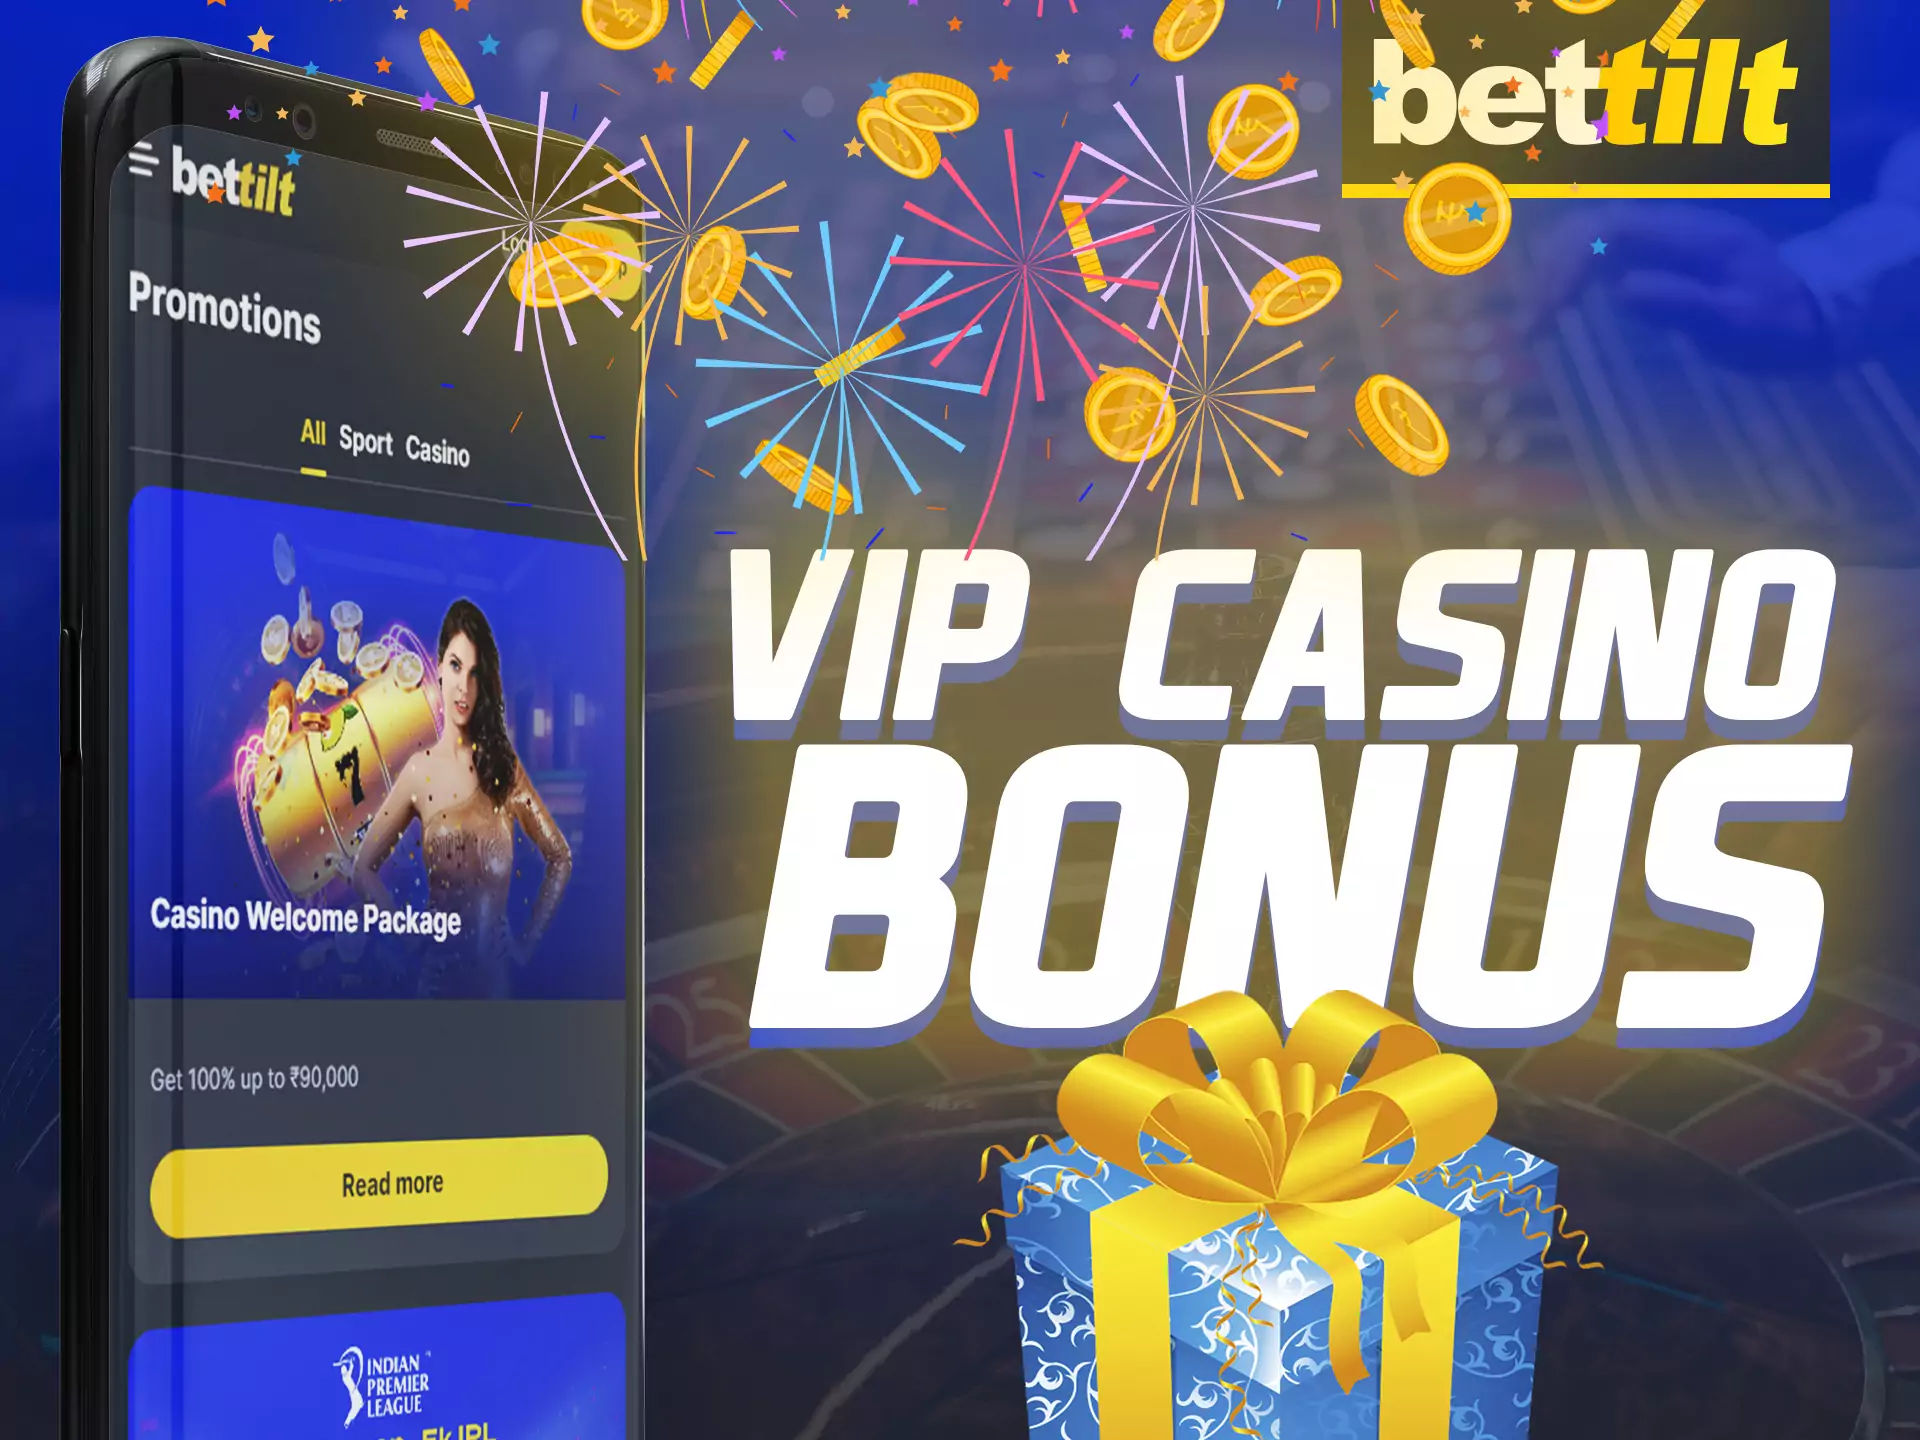 In the Bettilt app you can get a VIP bonus for the casino.